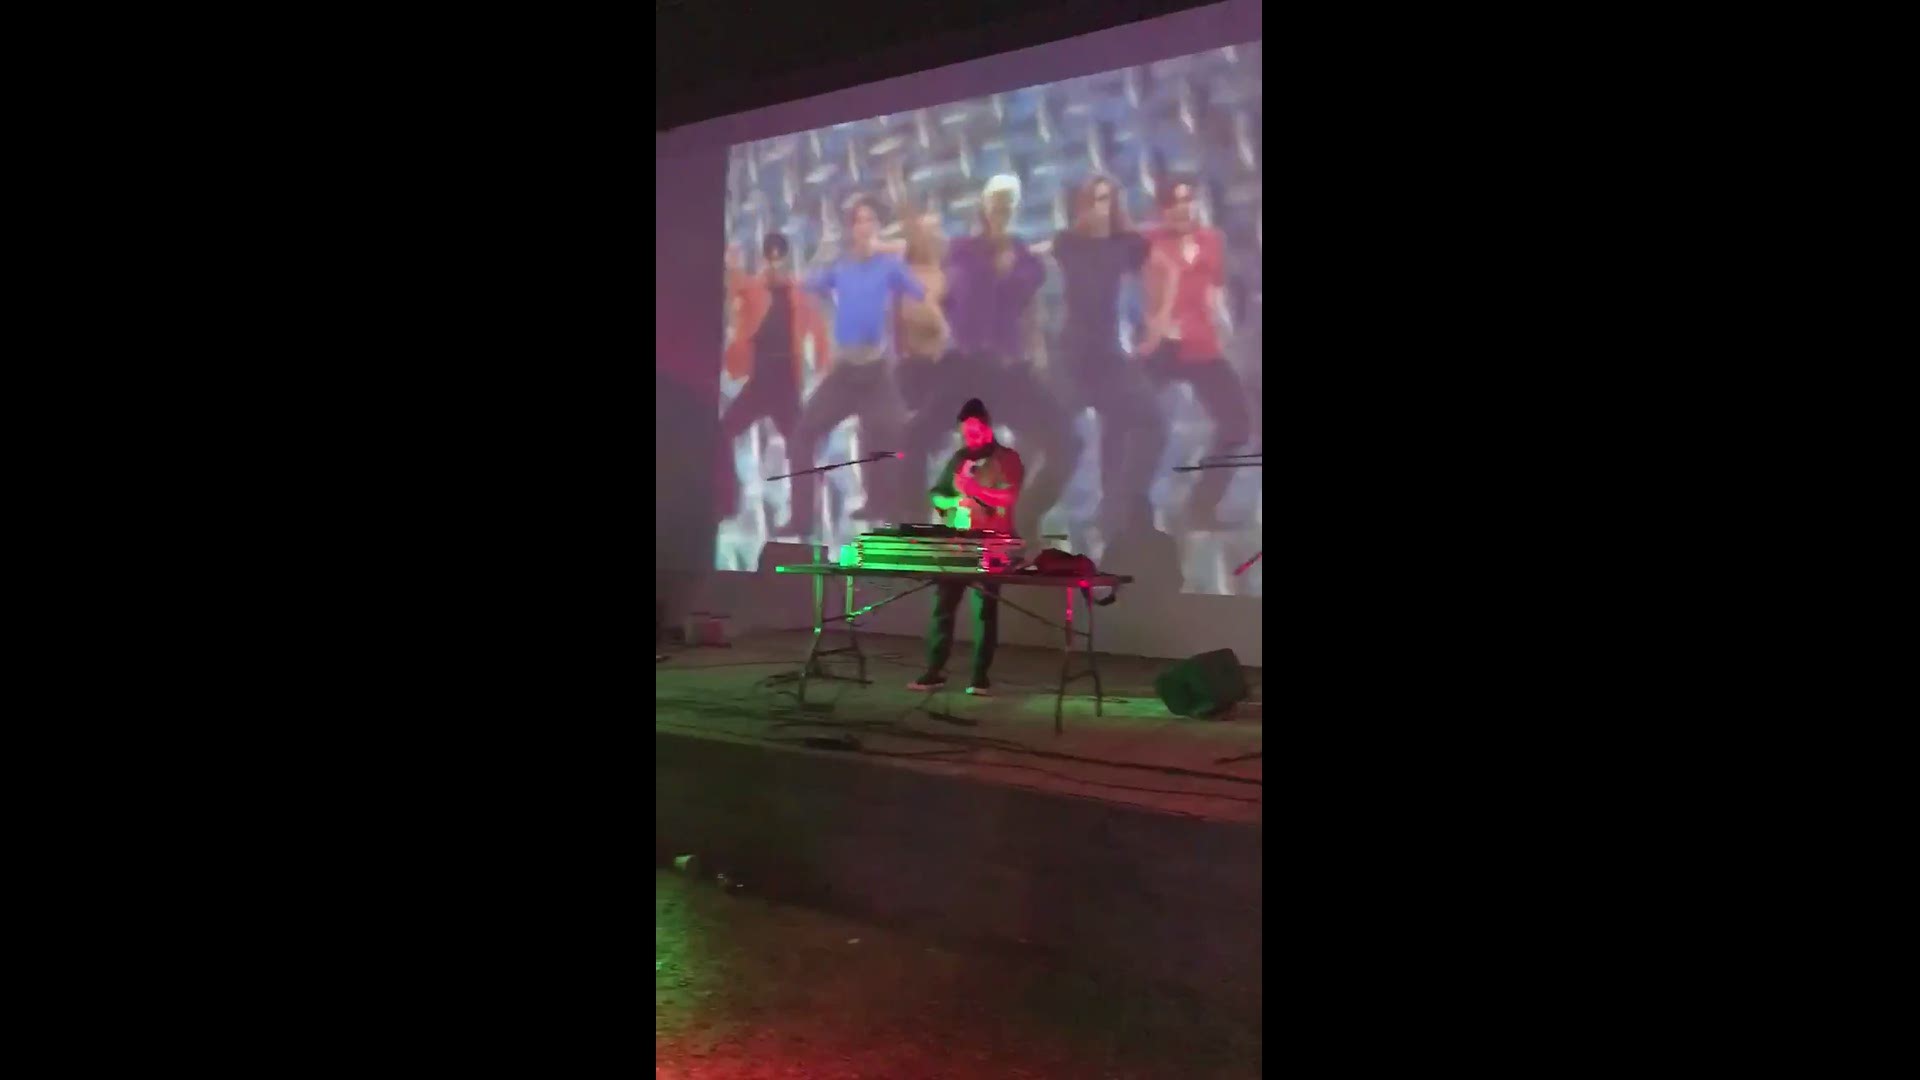 It's Game of Thrones - cumbia style! A DJ at a Houston beer garden put a spin of the show's theme song during the bar's "Selena Night" before the show's season 8 premiere. Video courtesy Nadia Tamez-Robledo/Twitter.